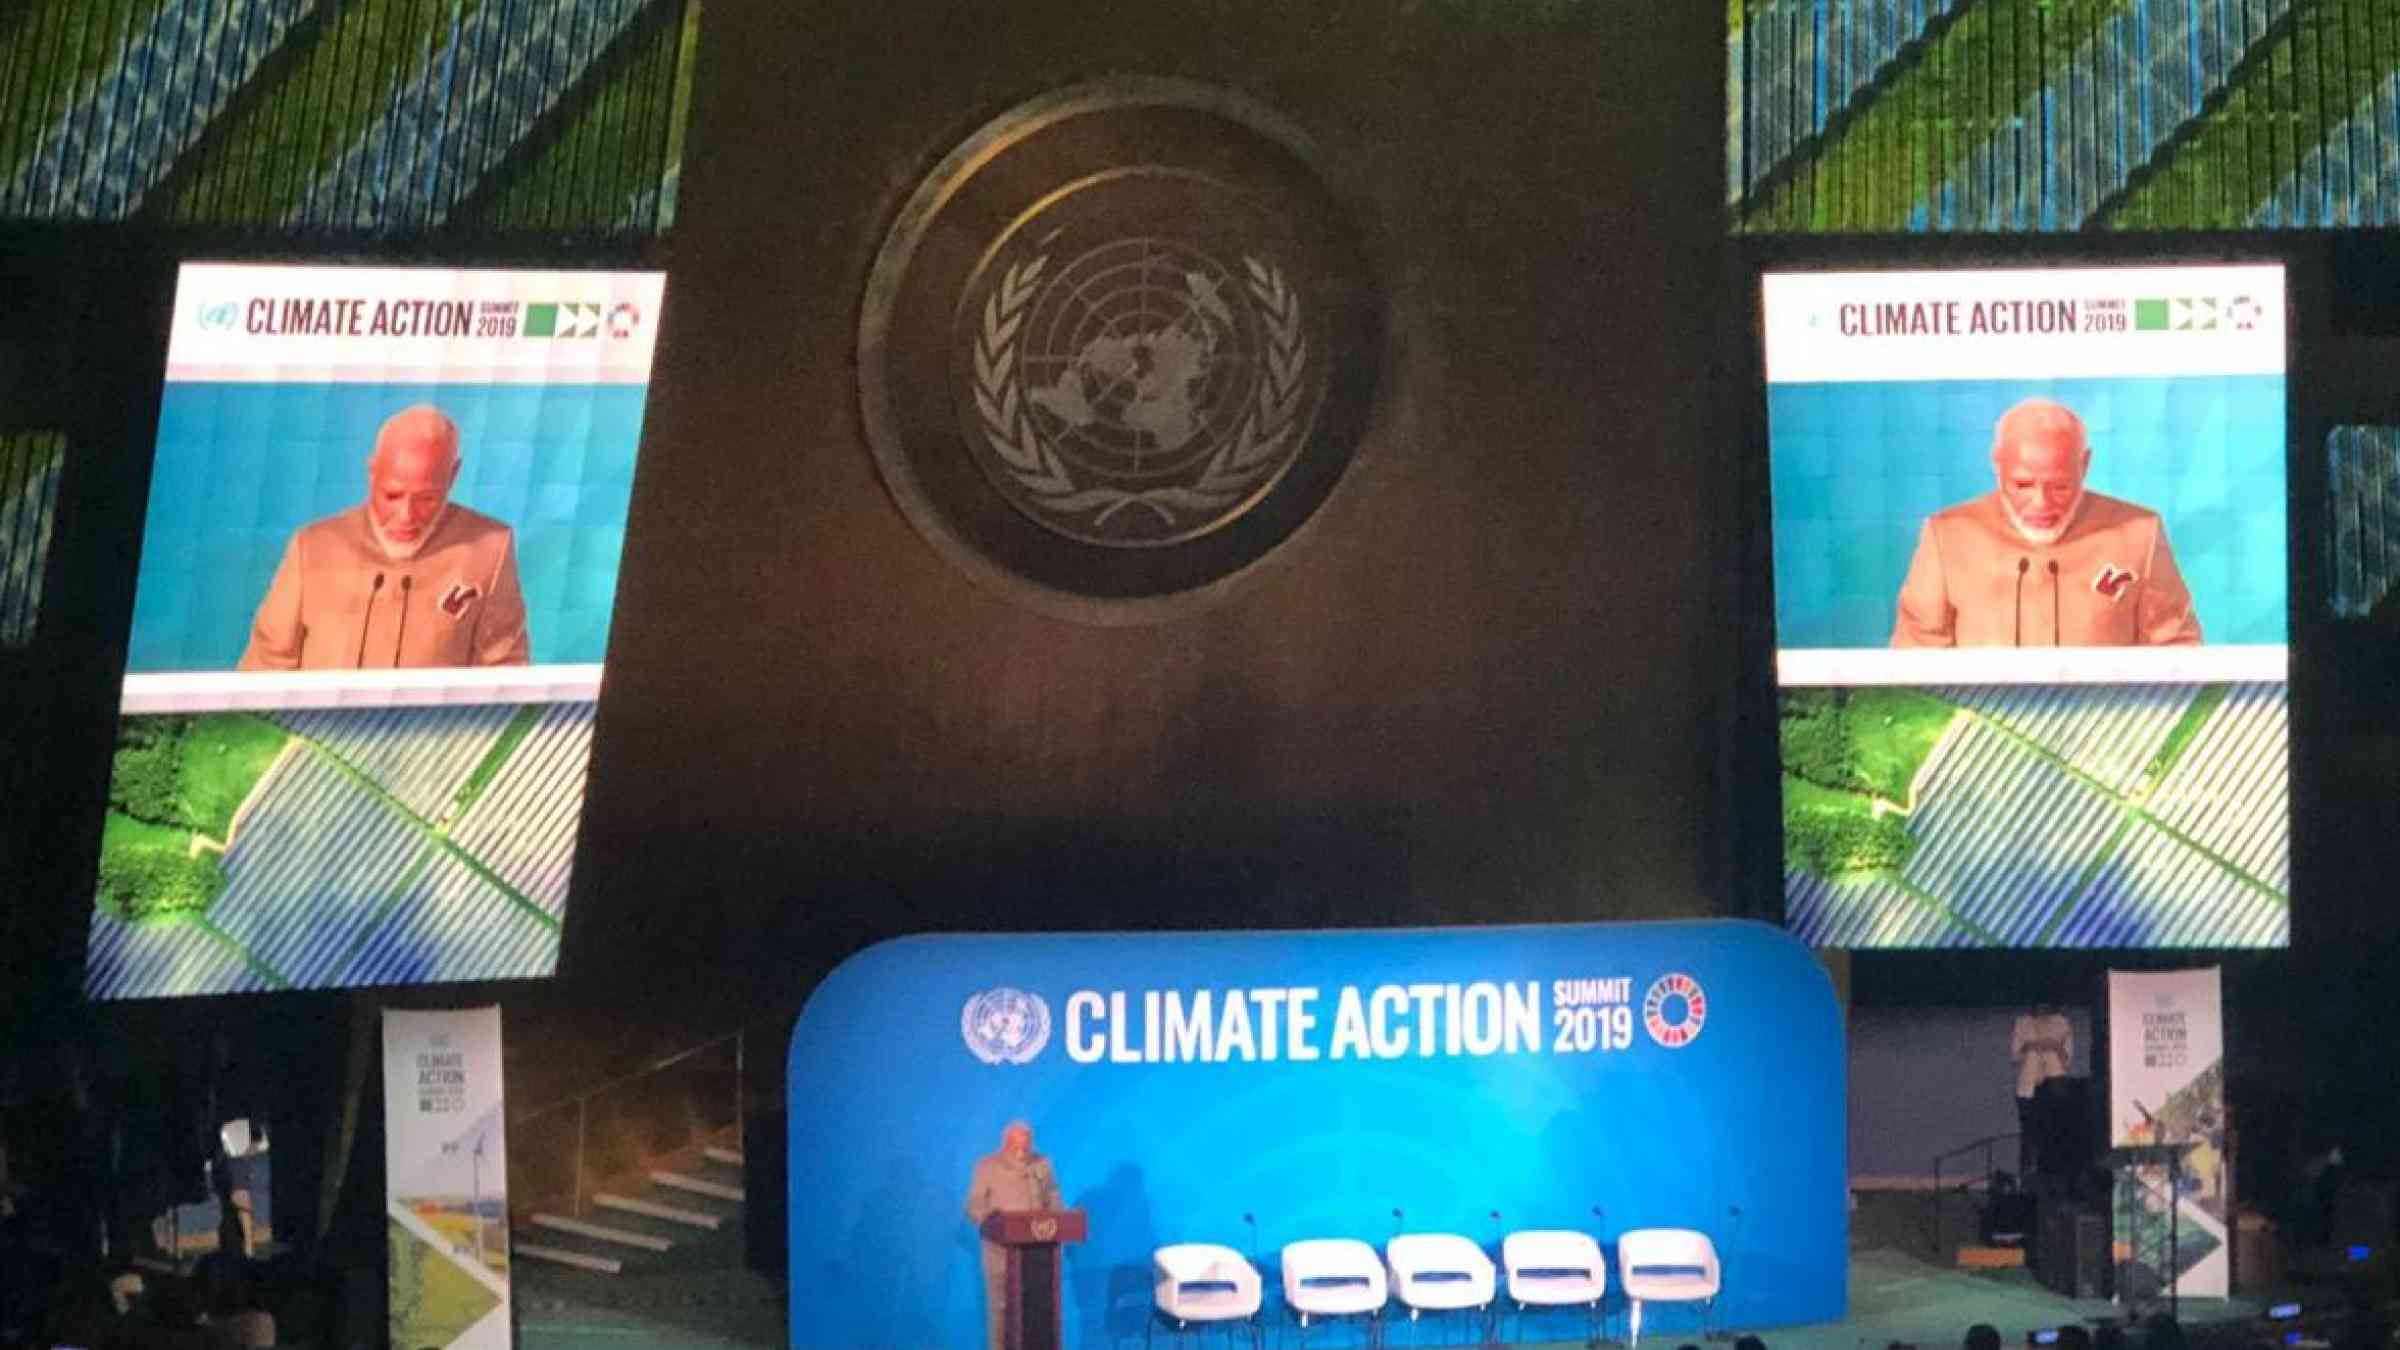 Indian Prime Minister, Narendra Modi, launches the Coalition for Disaster Resilient Infrastructure at the UN Climate Action Summit